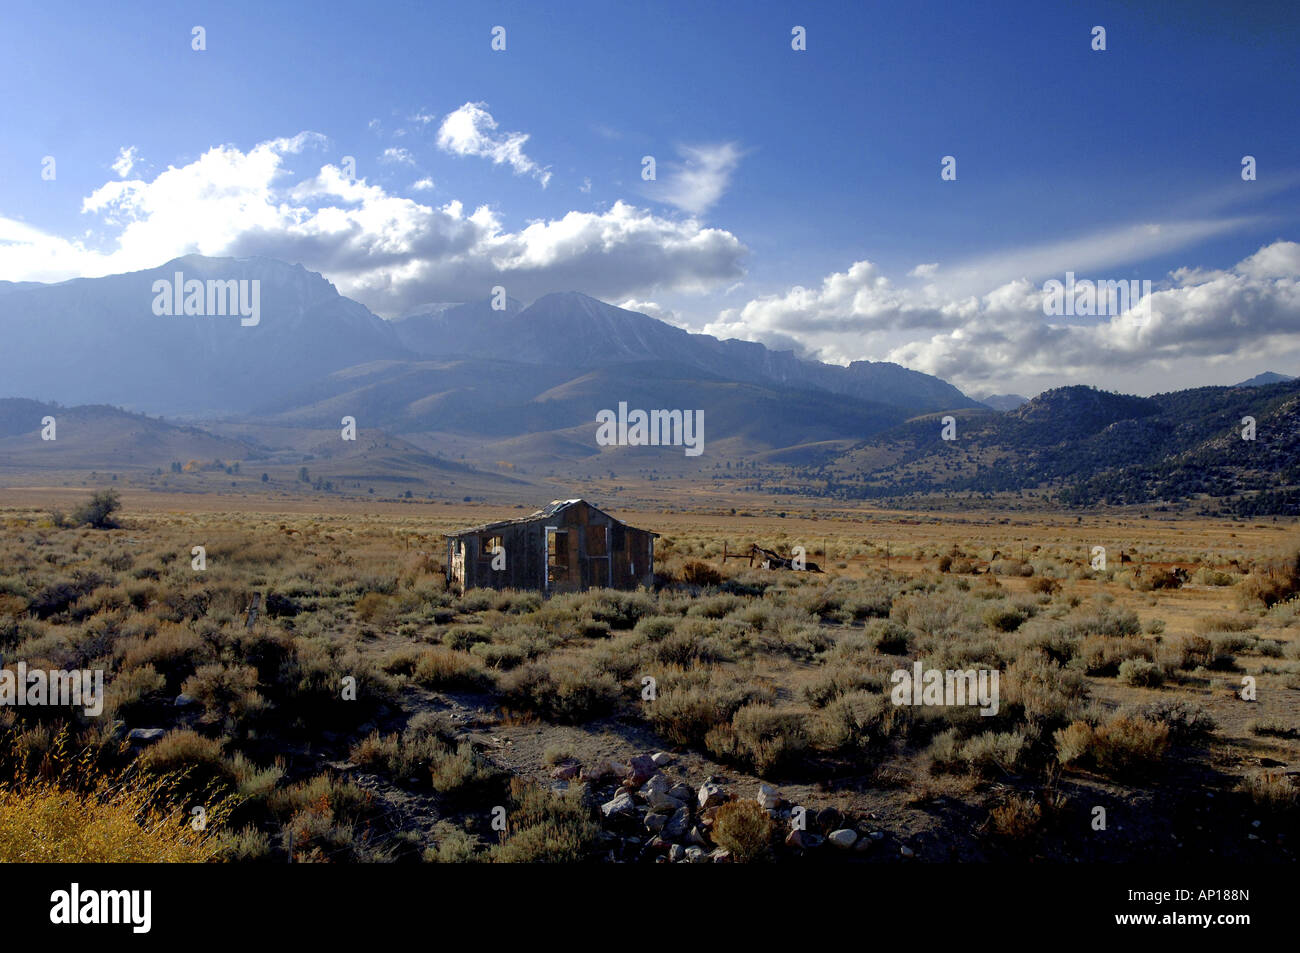 Abandoned Hut in front of the East Side of the Sierra Nevada, California, USA Stock Photo